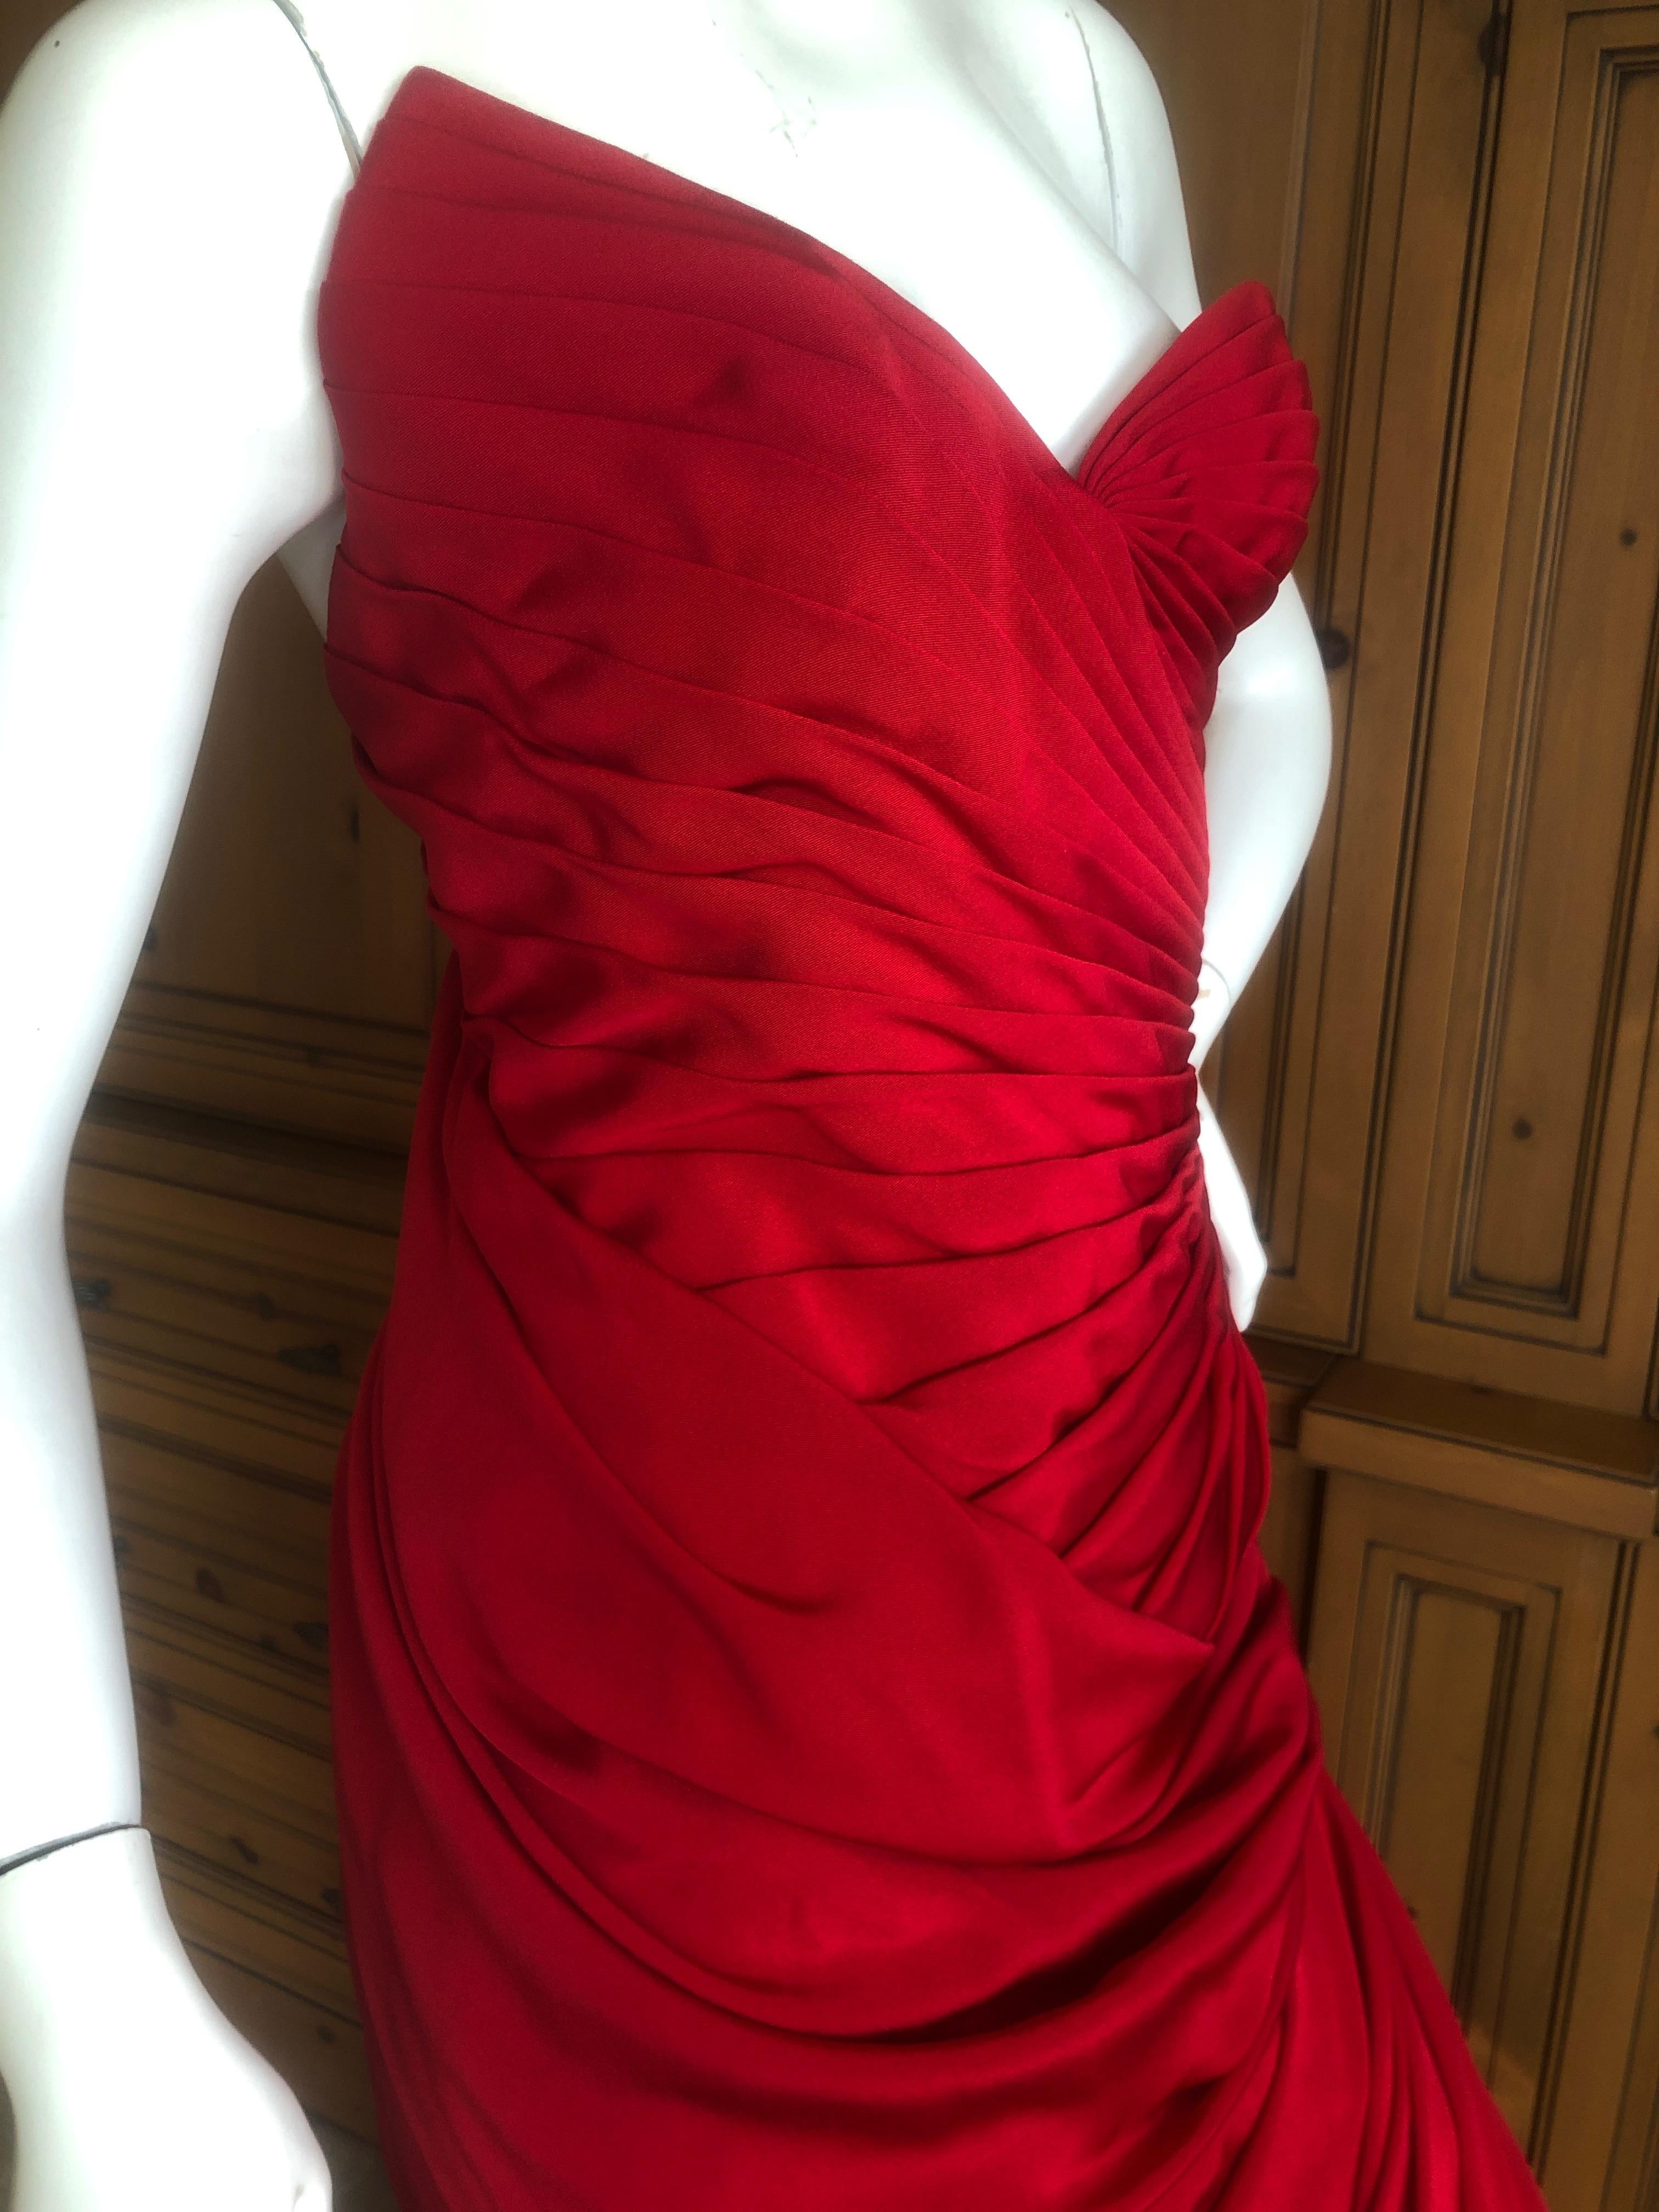 Emanuel Ungaro Numbered Haute Couture Fall 1984 Red  Strapless Evening Dress 9